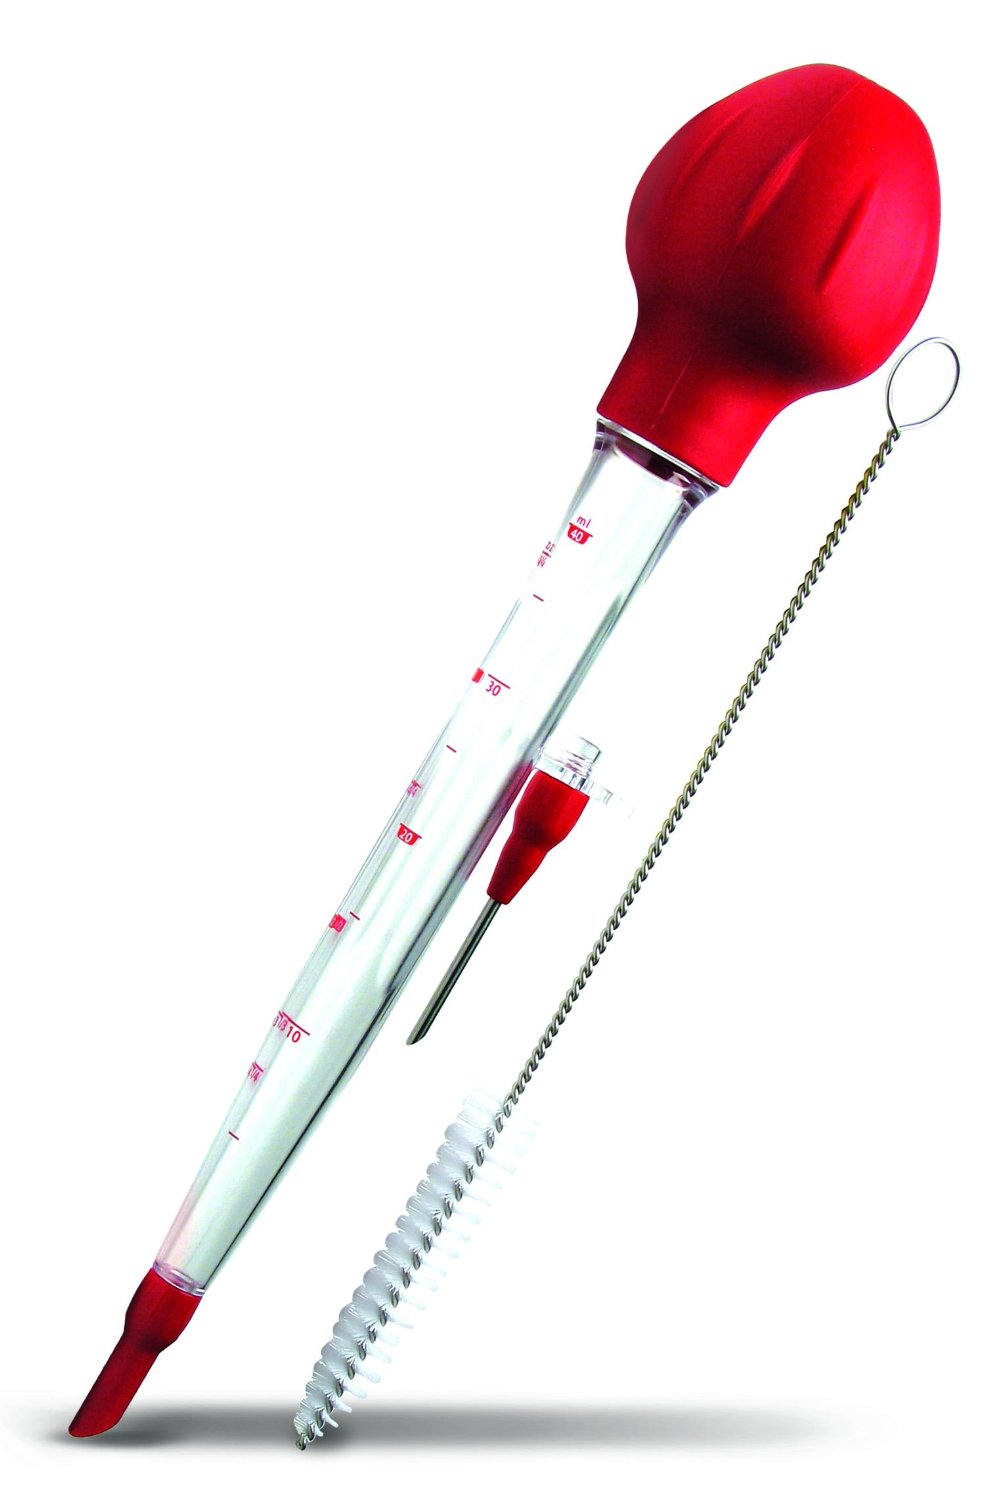 Zyliss Baster and flavor injector $12.99